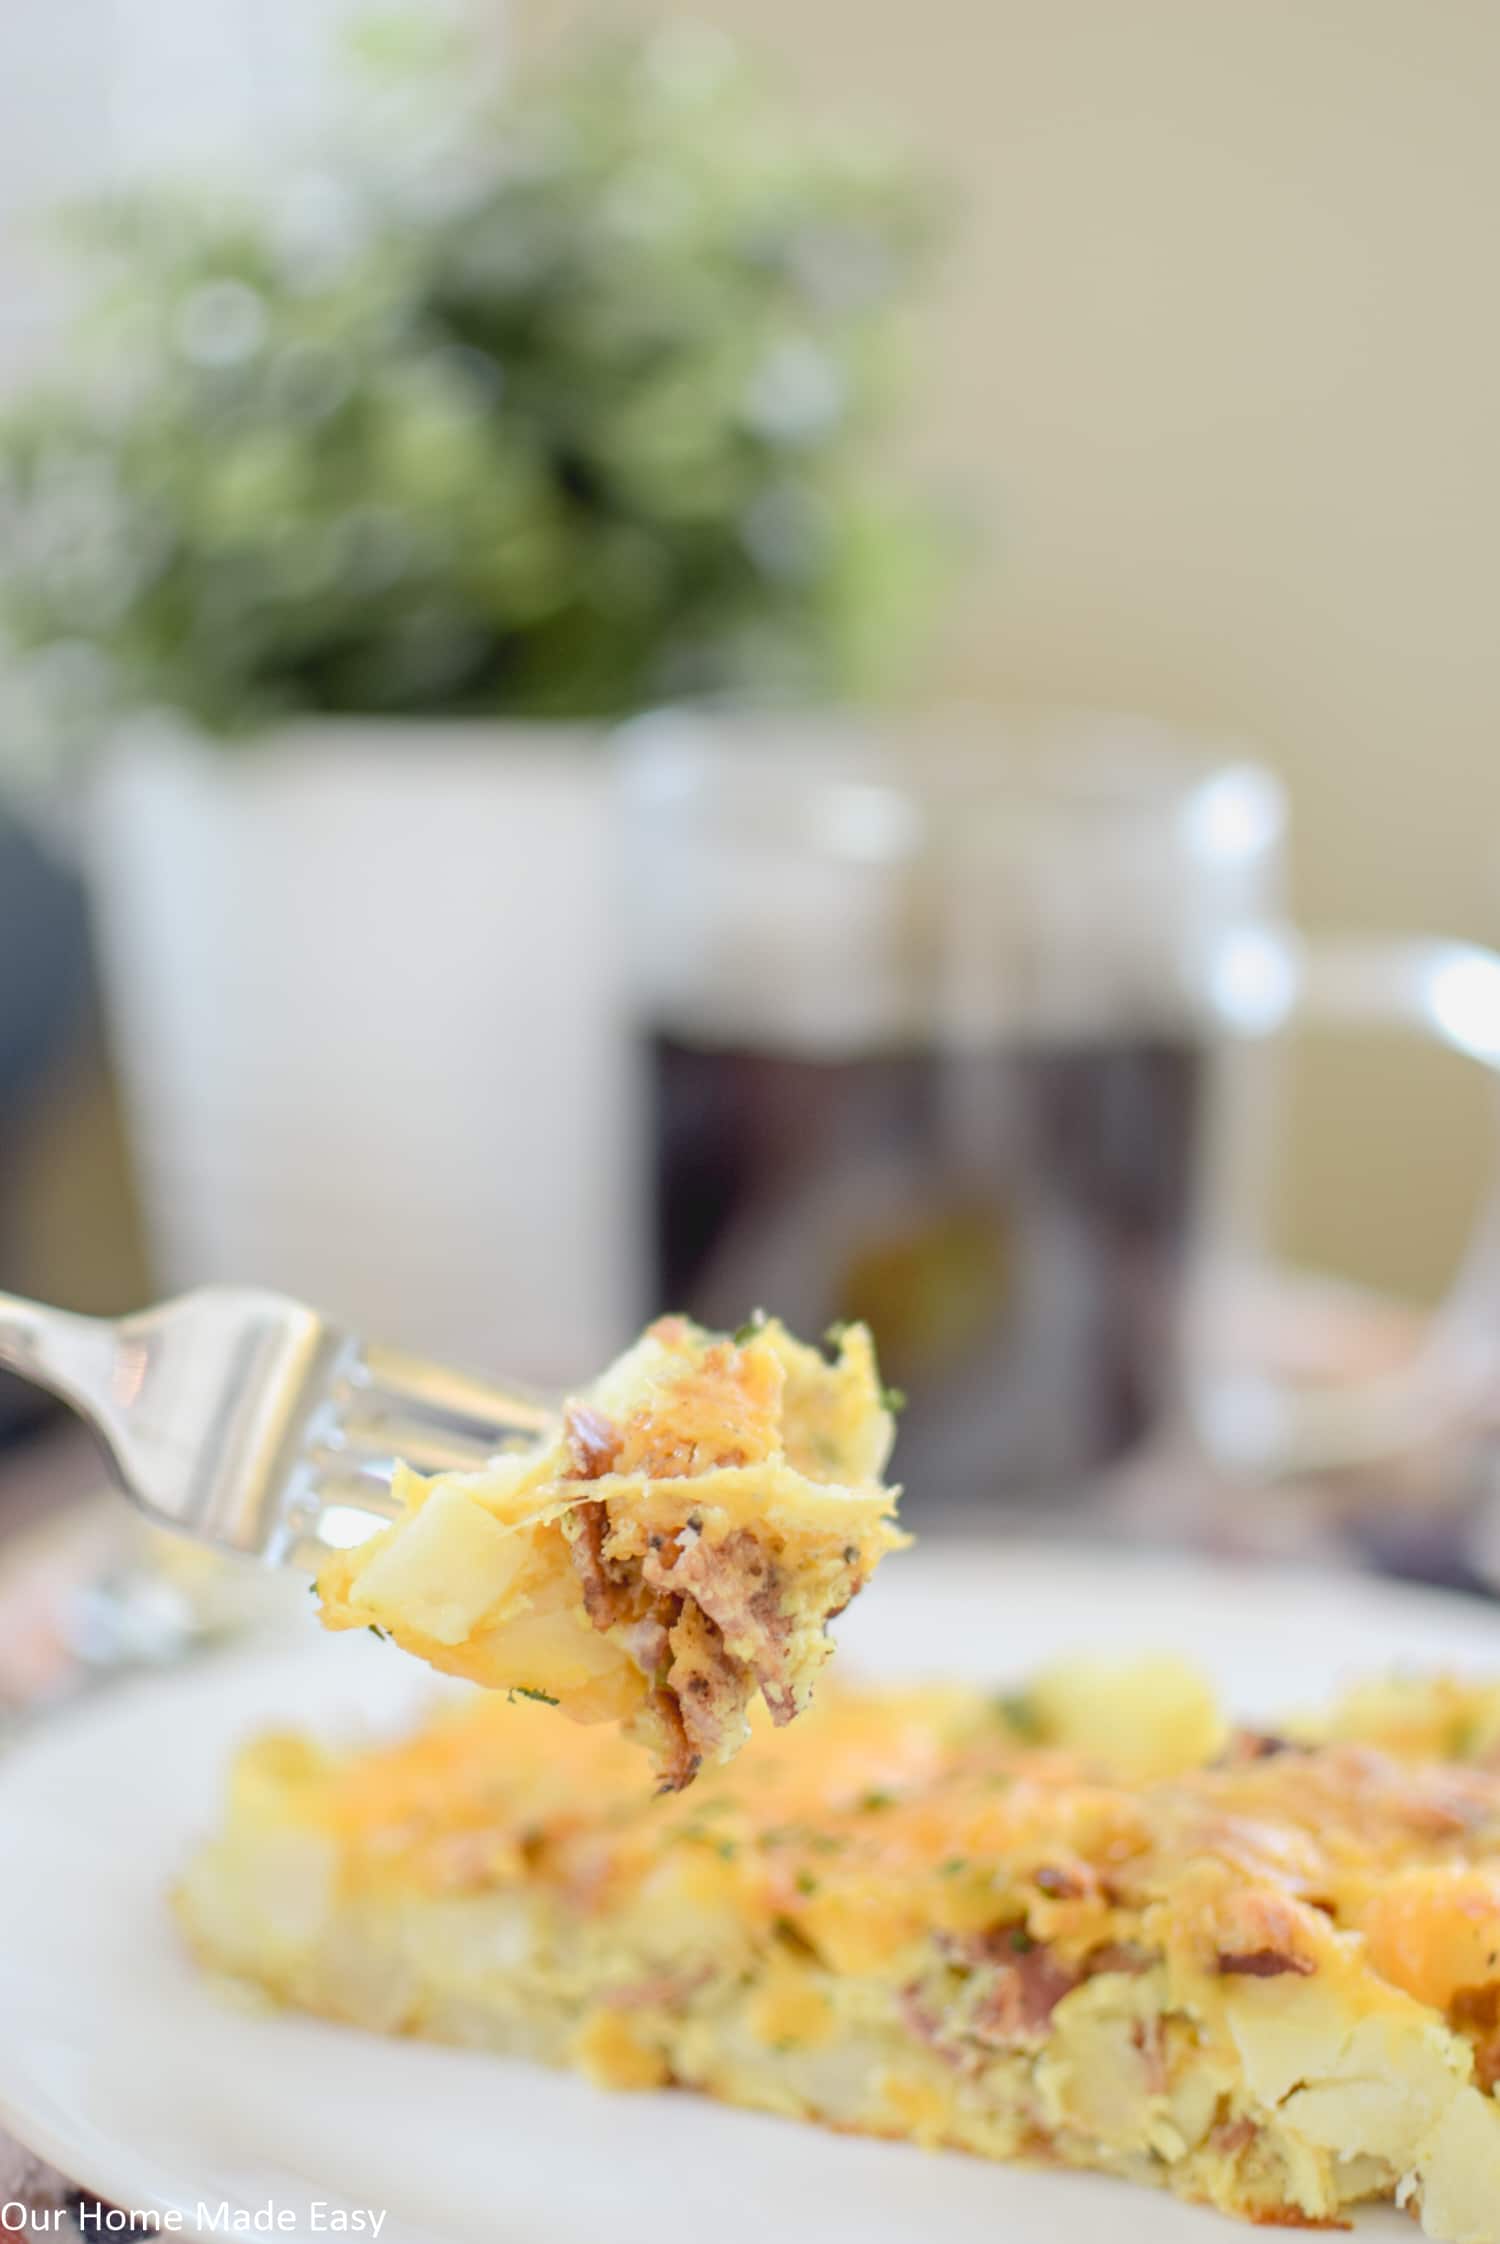 Make this cheesy breakfast casserole ahead of time so Christmas morning breakfast is ready to pop in the oven and enjoy